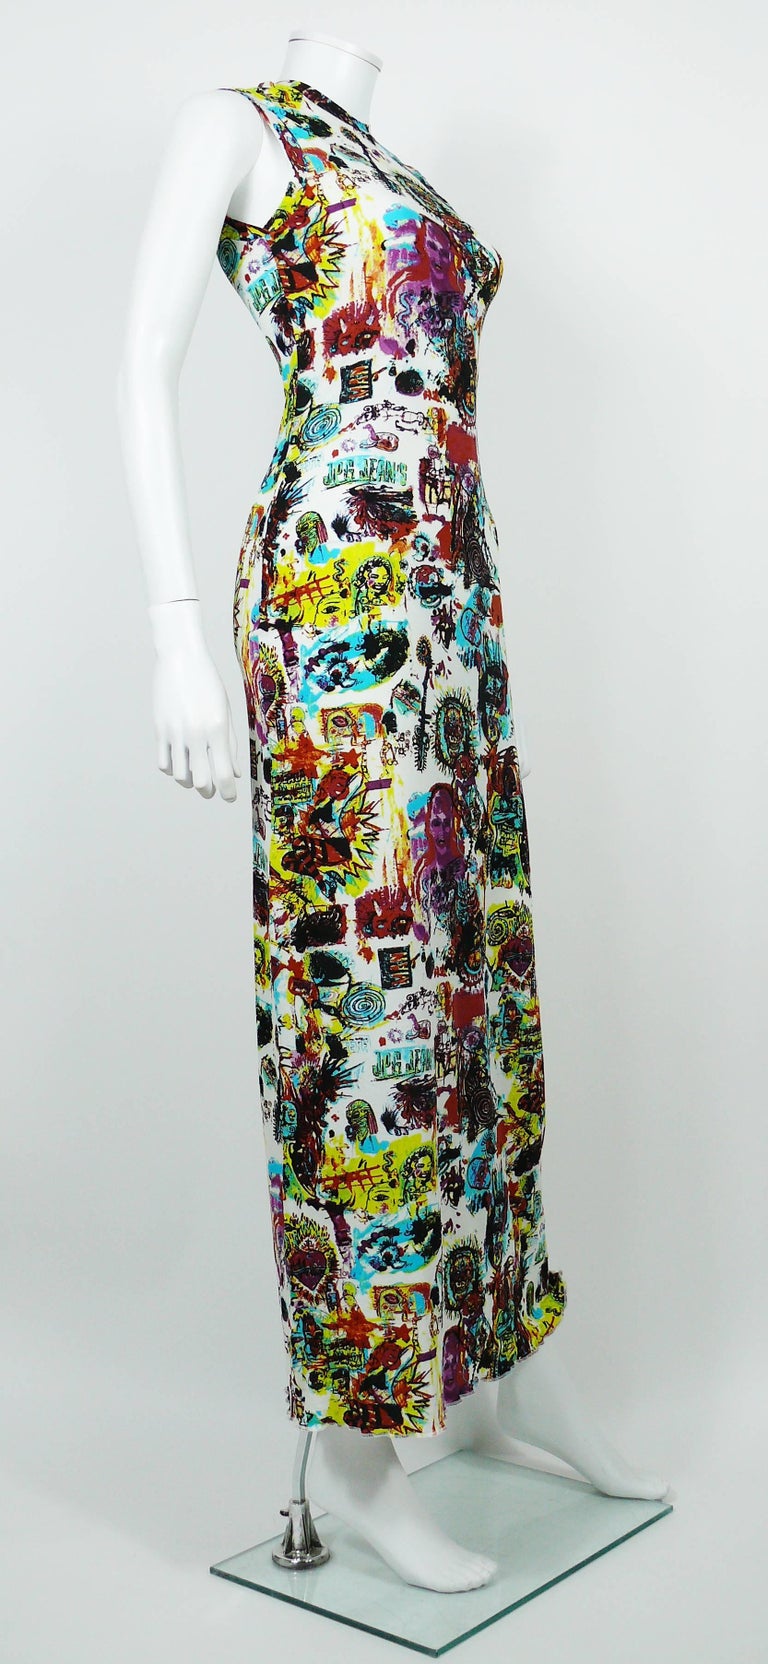 Jean Paul Gaultier Vintage Basquiat Print Inspired Maxi Dress Size S at ...